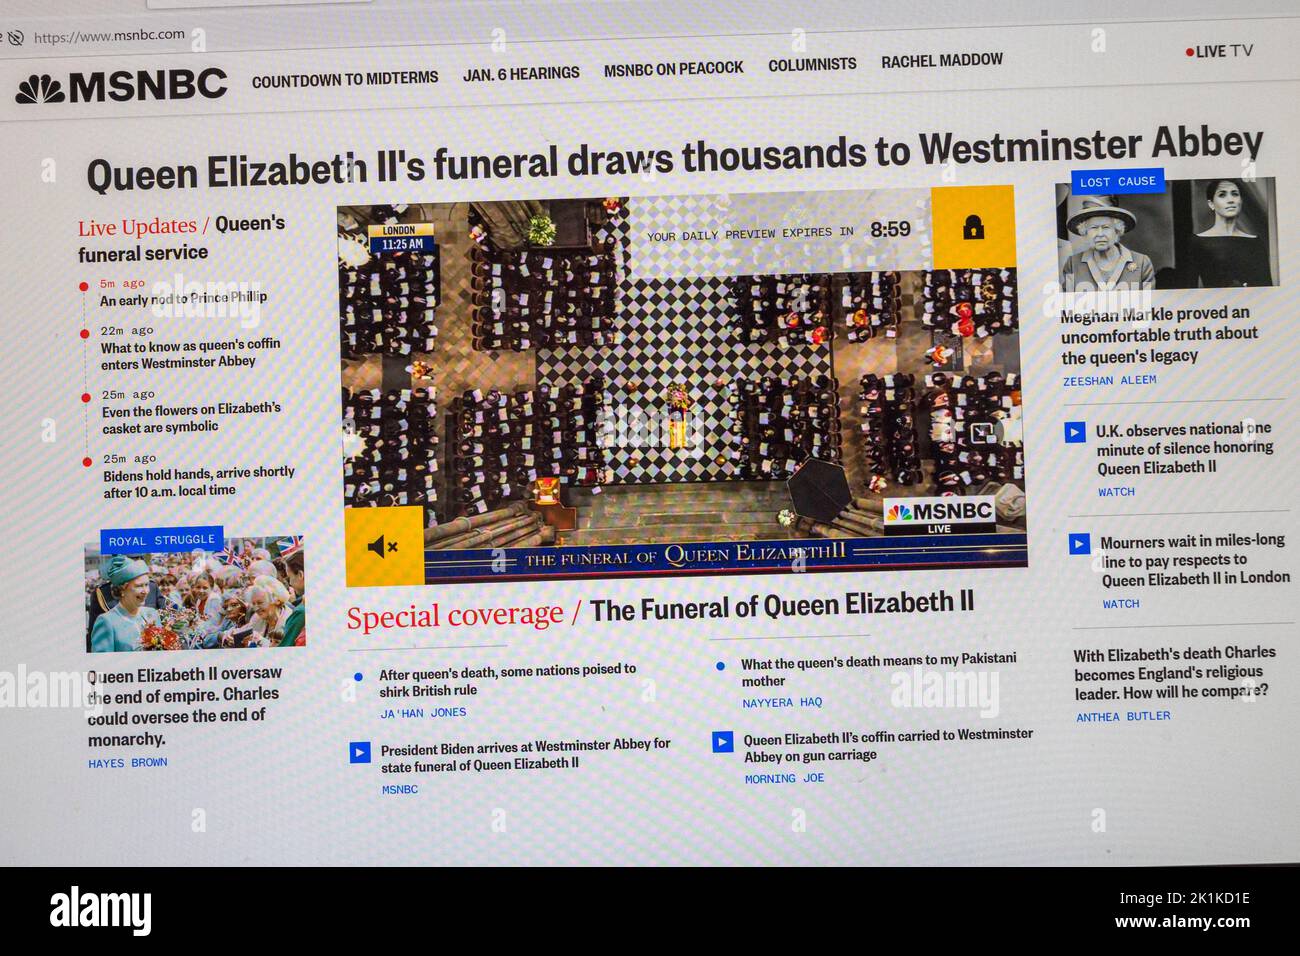 The MSNBC News website during the funeral of Queen Elizabeth II in London on 19th September 2022. Stock Photo